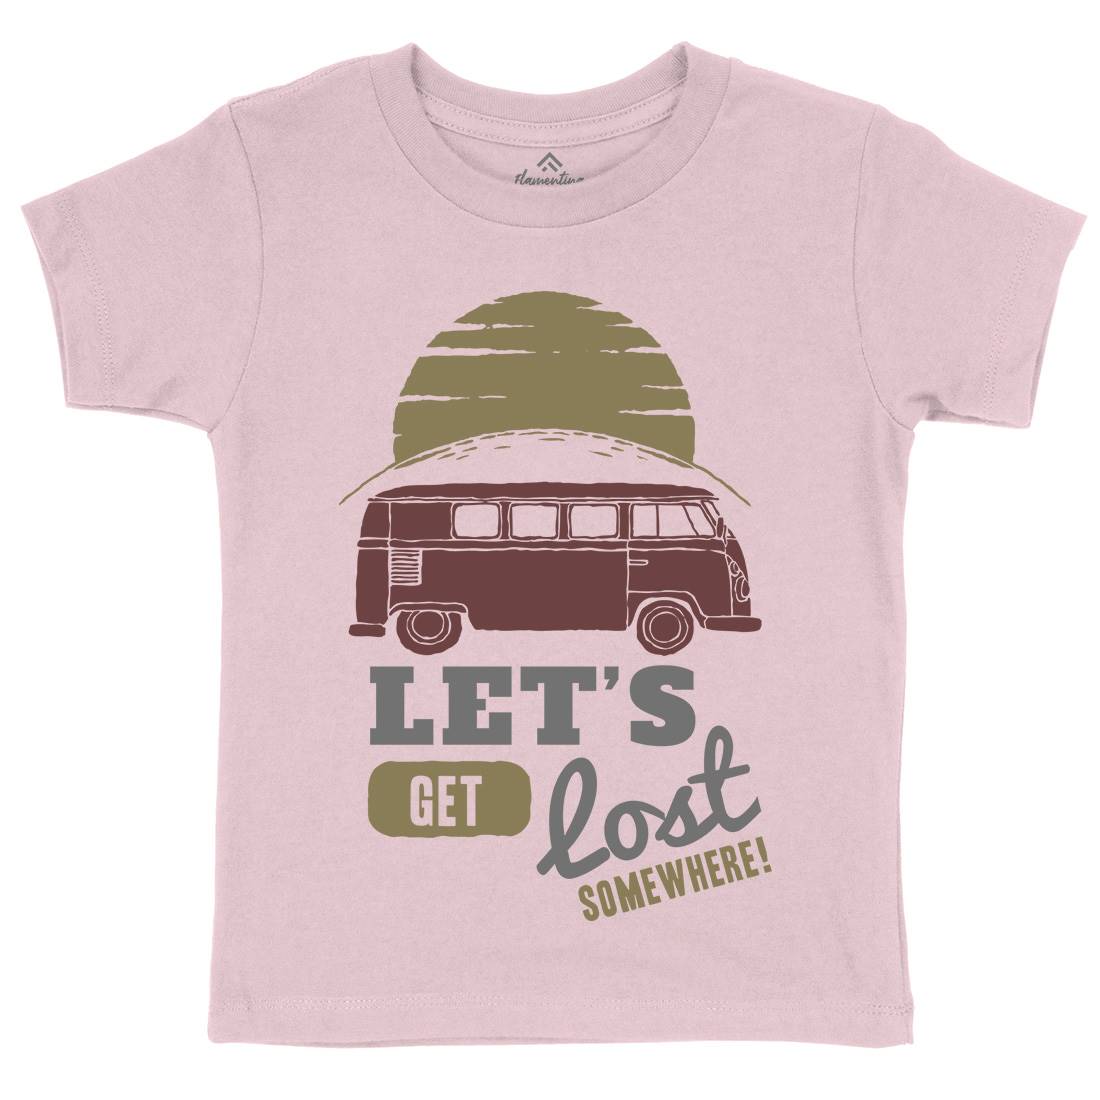 Get Lost Kids Crew Neck T-Shirt Nature A317